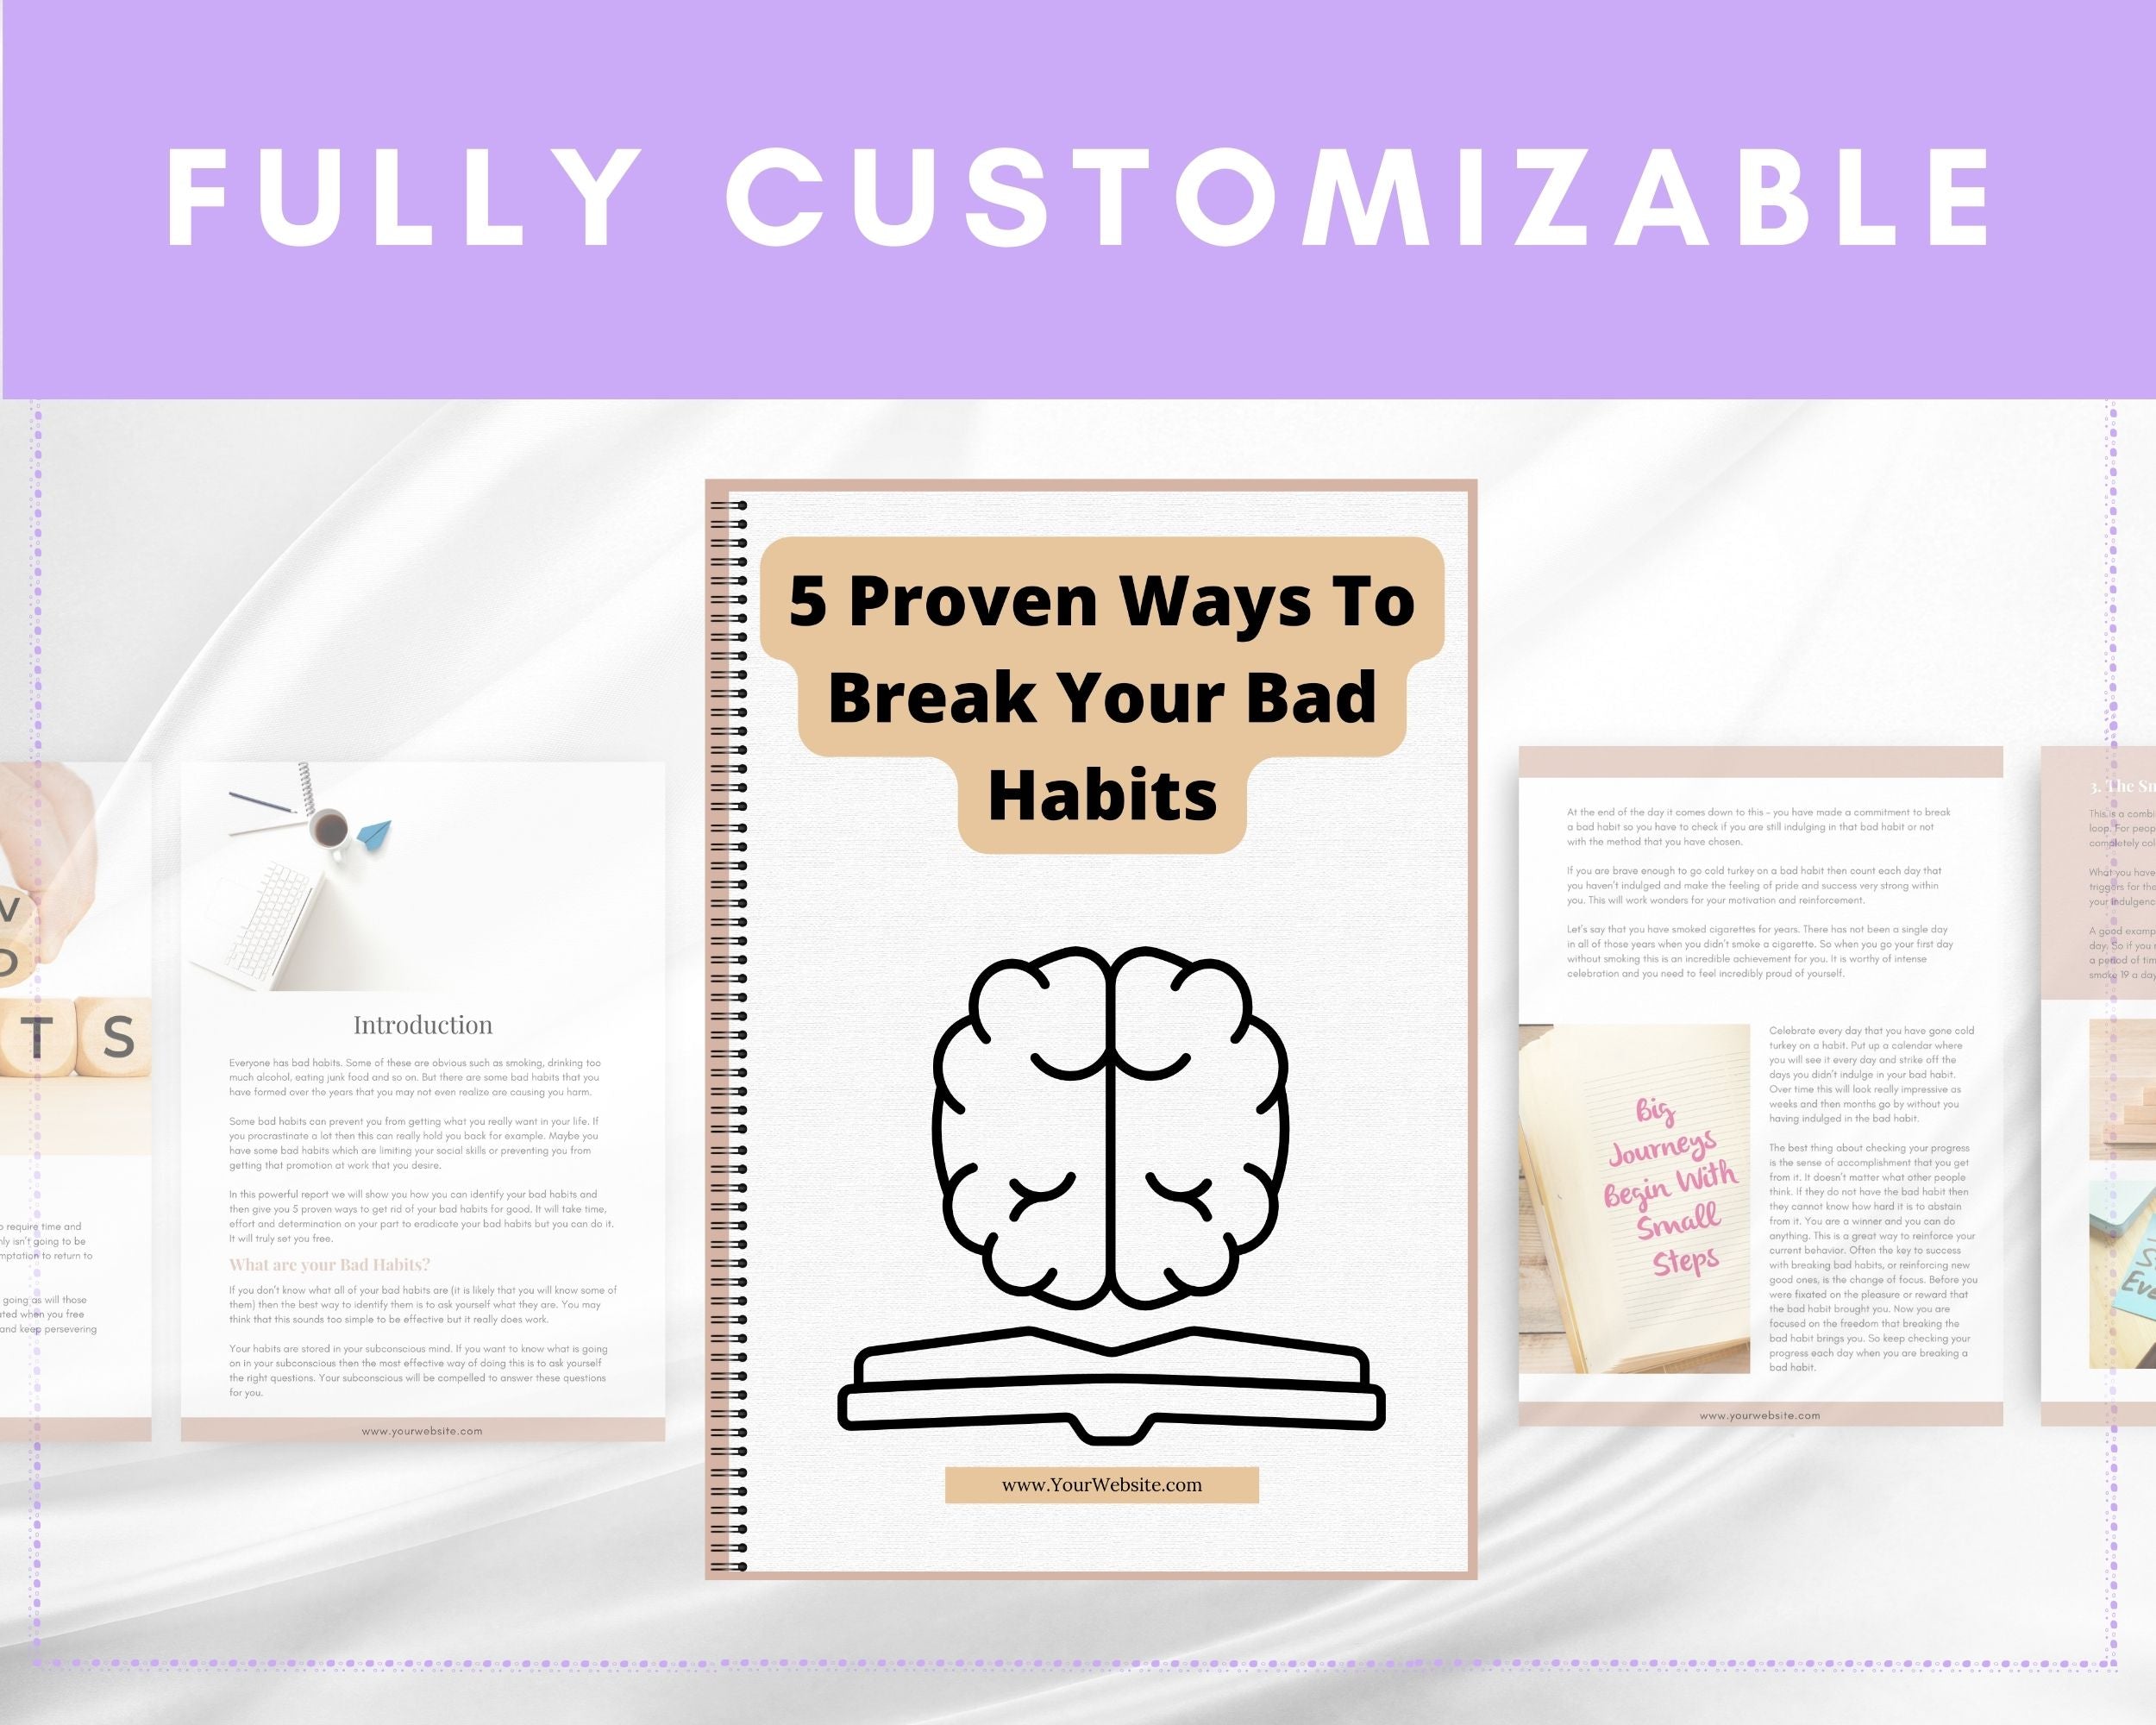 Editable 5 Proven Ways To Break Your Bad Habits Ebook | Done-for-You Ebook in Canva | Rebrandable and Resizable Canva Template